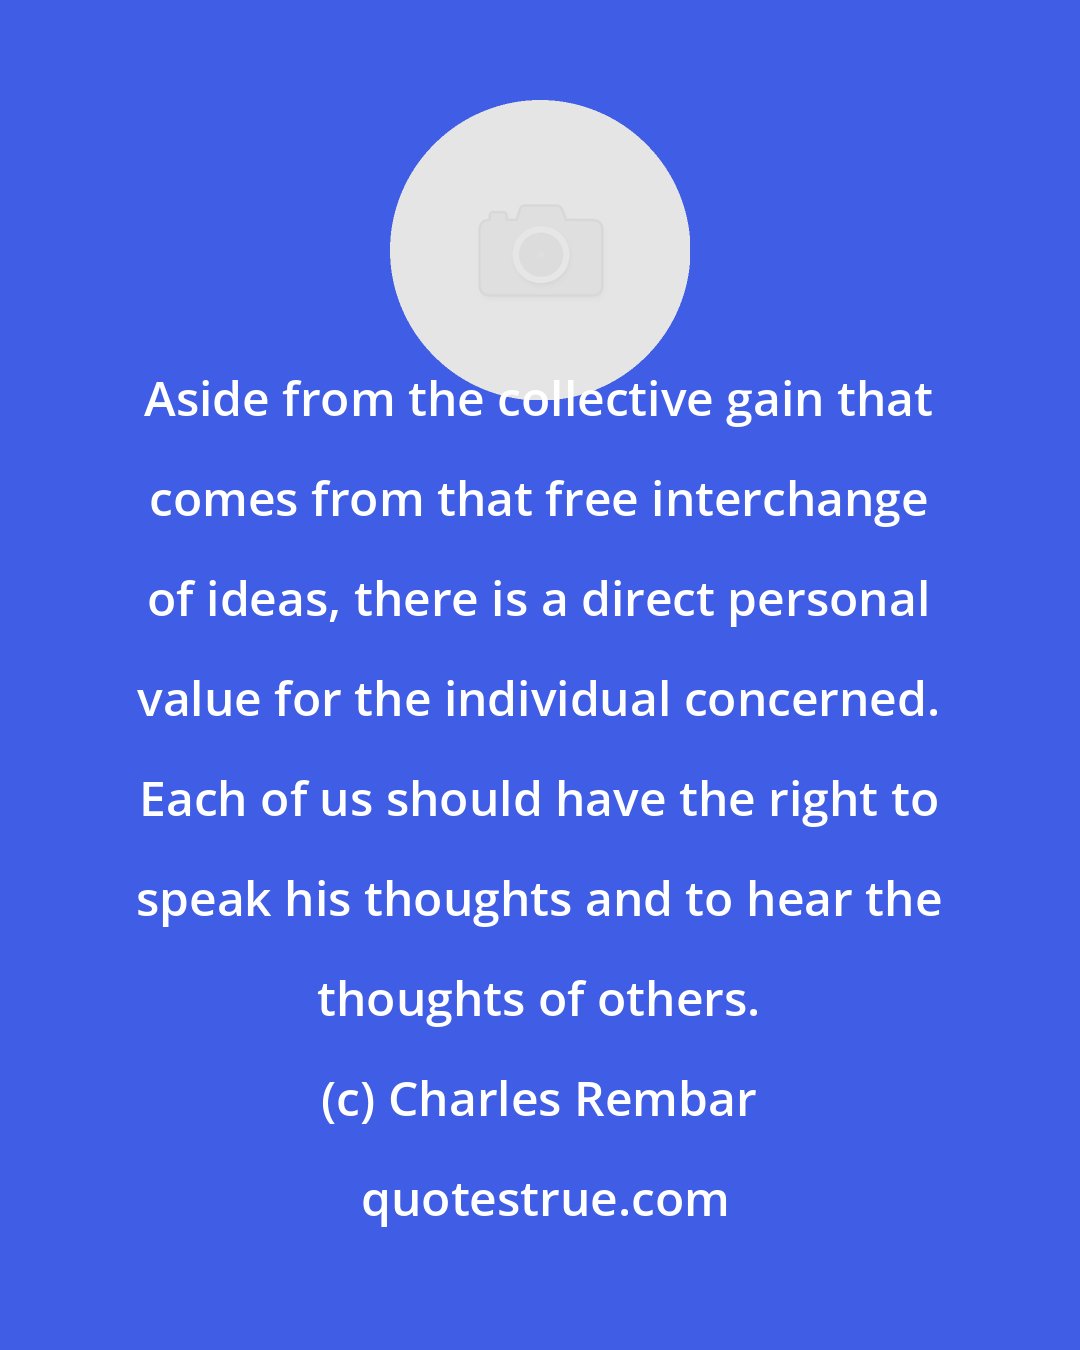 Charles Rembar: Aside from the collective gain that comes from that free interchange of ideas, there is a direct personal value for the individual concerned. Each of us should have the right to speak his thoughts and to hear the thoughts of others.